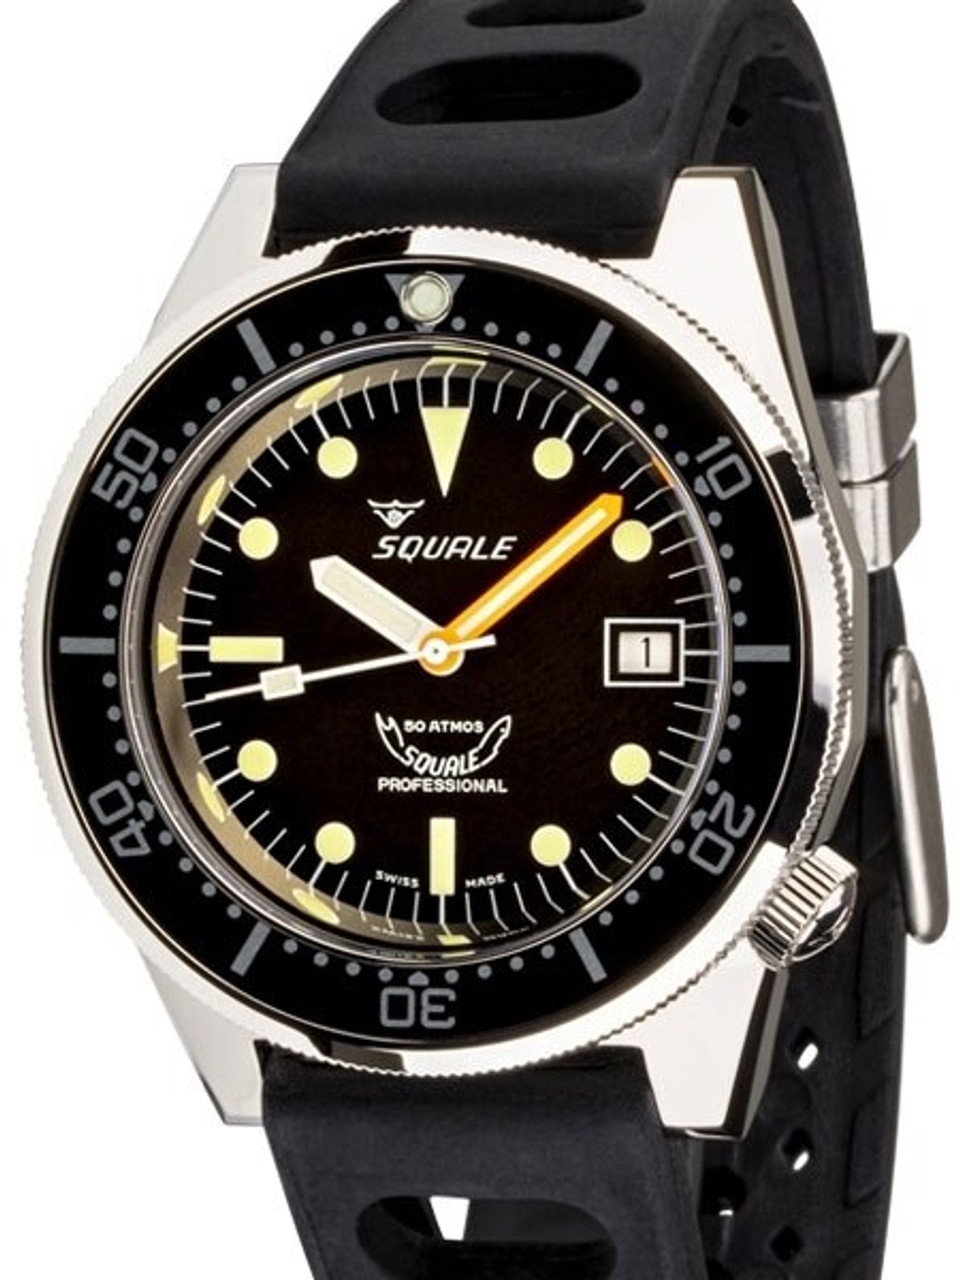 Squale 500 meter Professional Swiss Automatic Dive watch with Sapphire  Crystal #1521-026-A